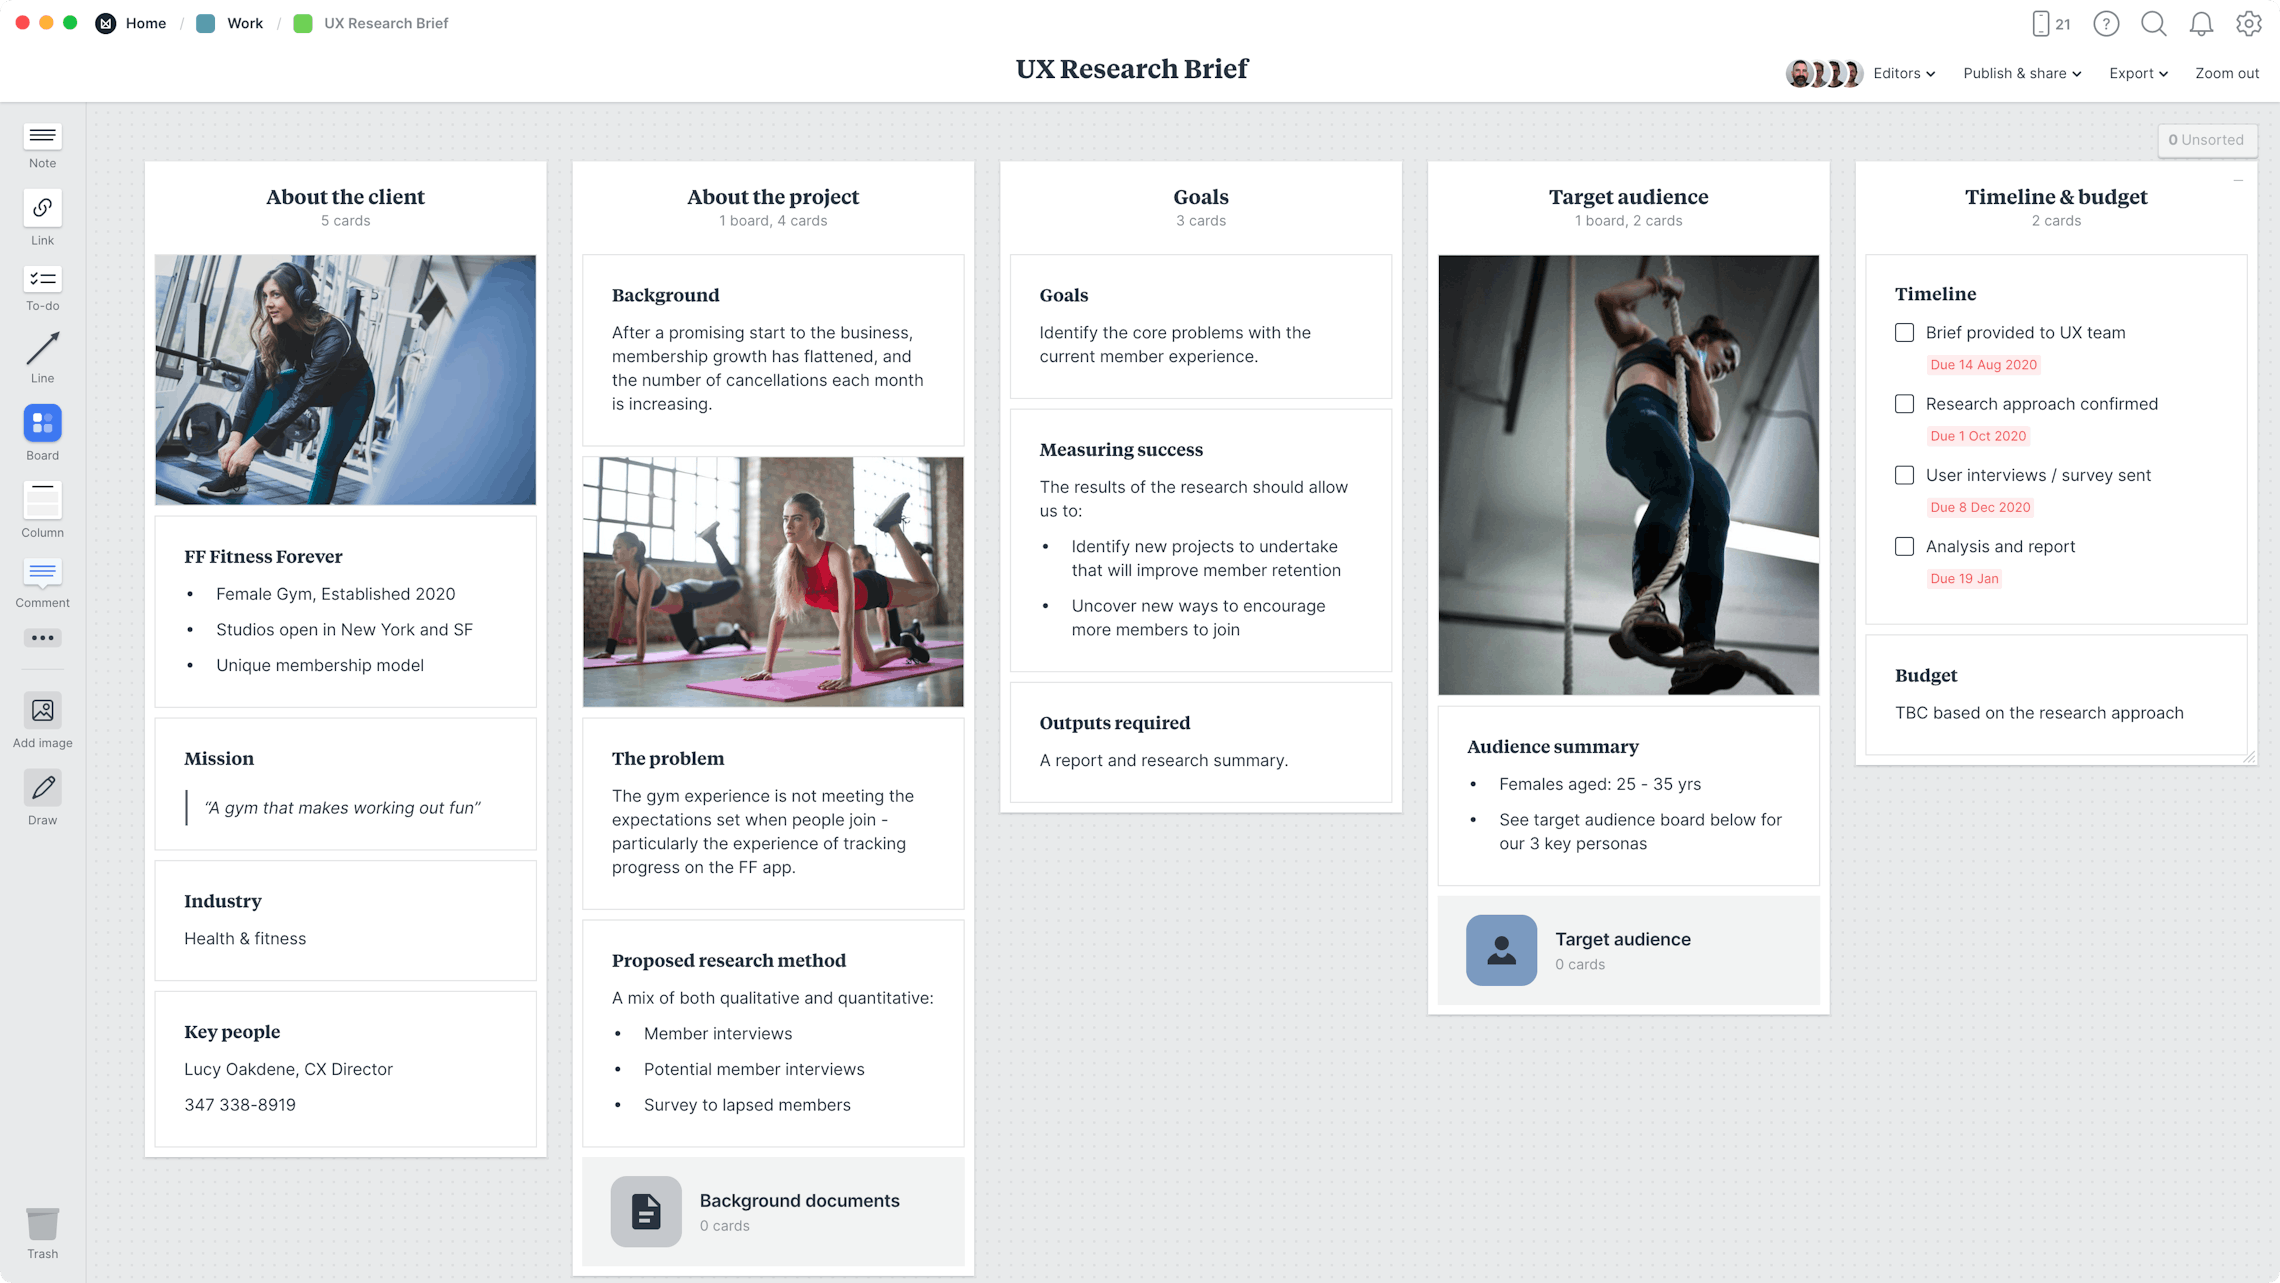 UX Research Brief Template, within the Milanote app